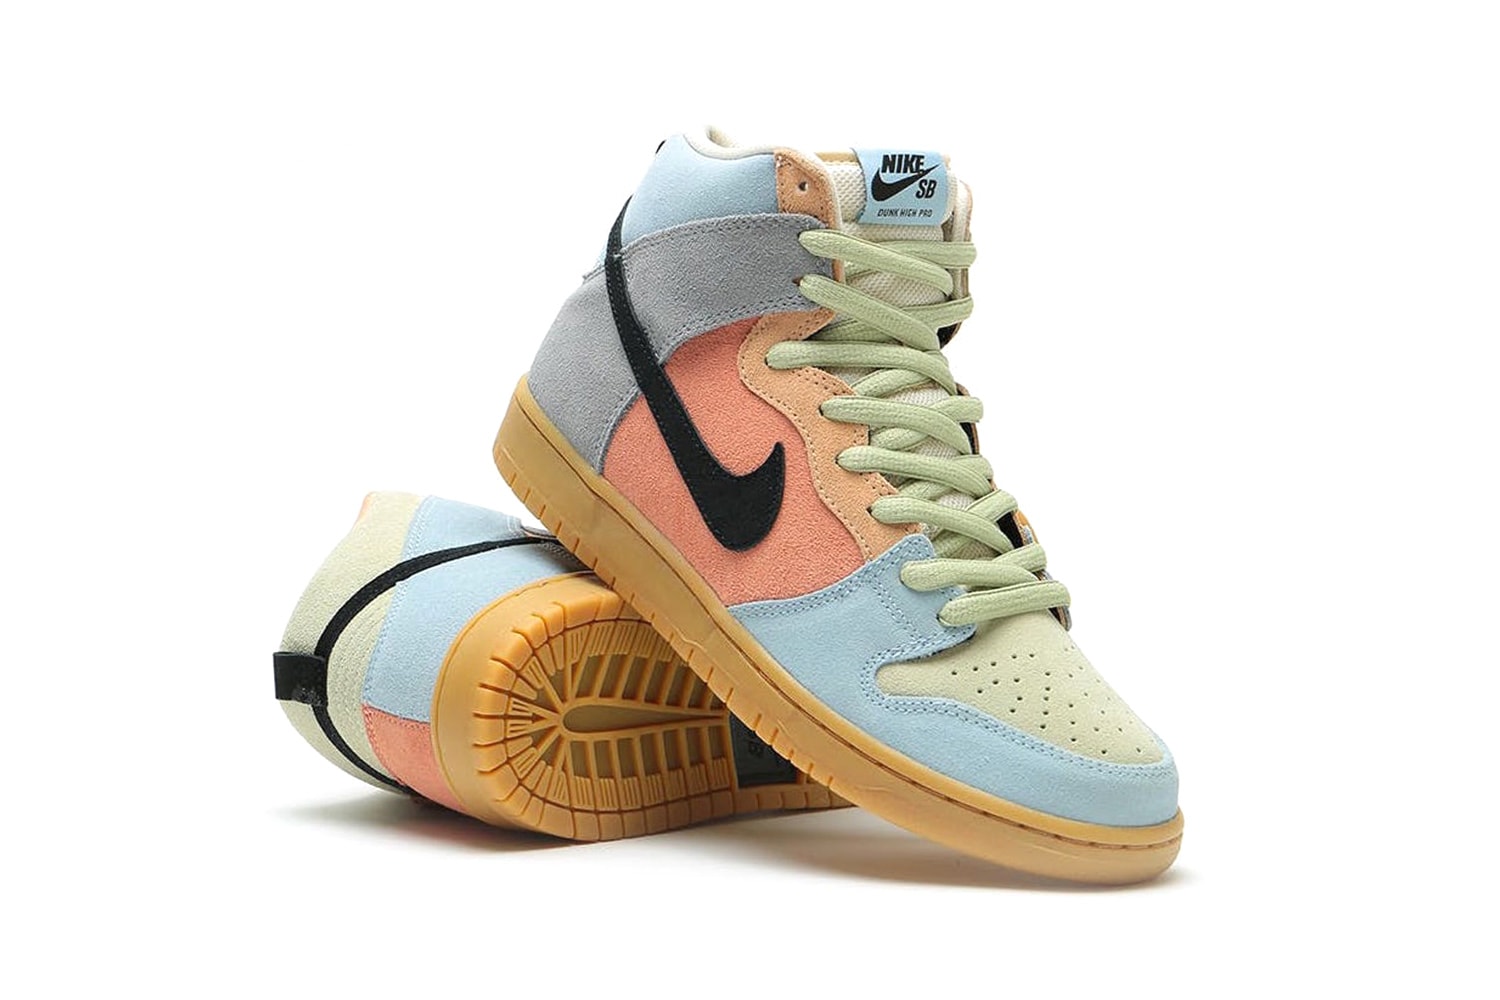 Nike SB Dunk High Pro "Easter Spectrum" Release Information Closer Look First Announcement Skateboarding Kicks Global Drop Footwear Colorful QS Suede Limited Edition